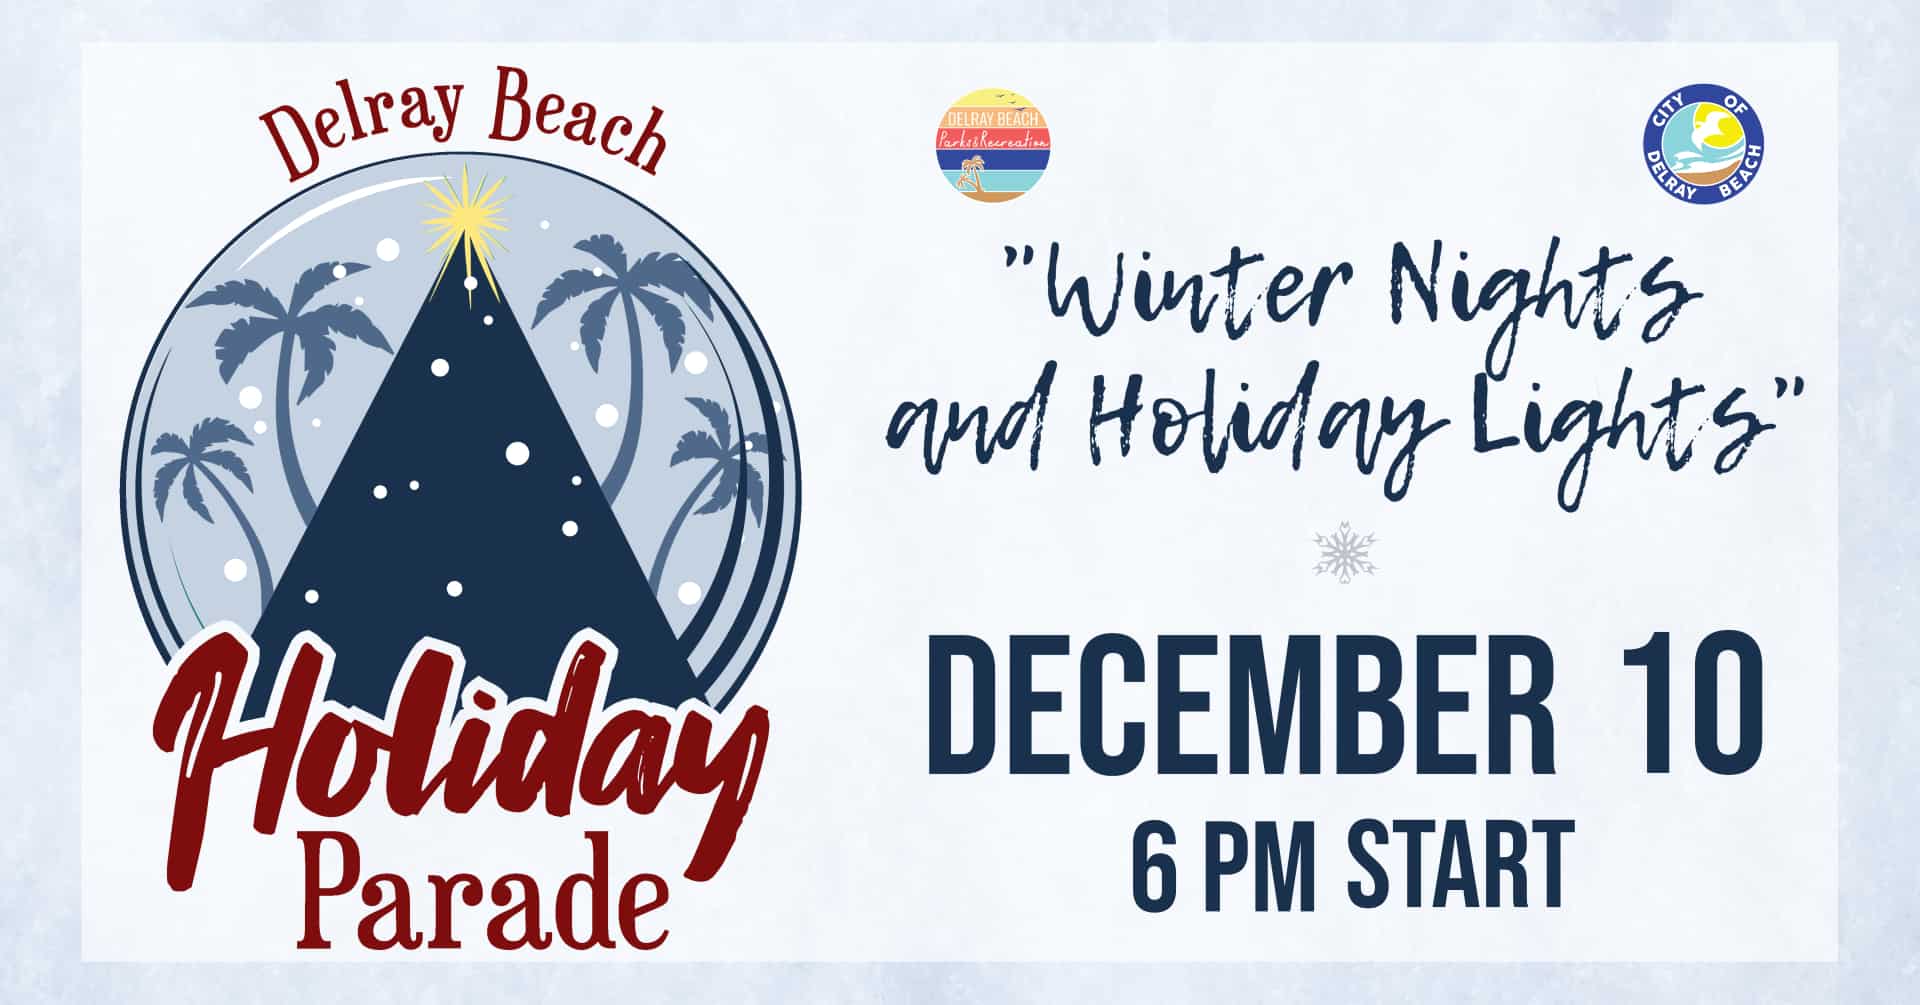 Delray Beach - Winter Nights and Holiday Lights